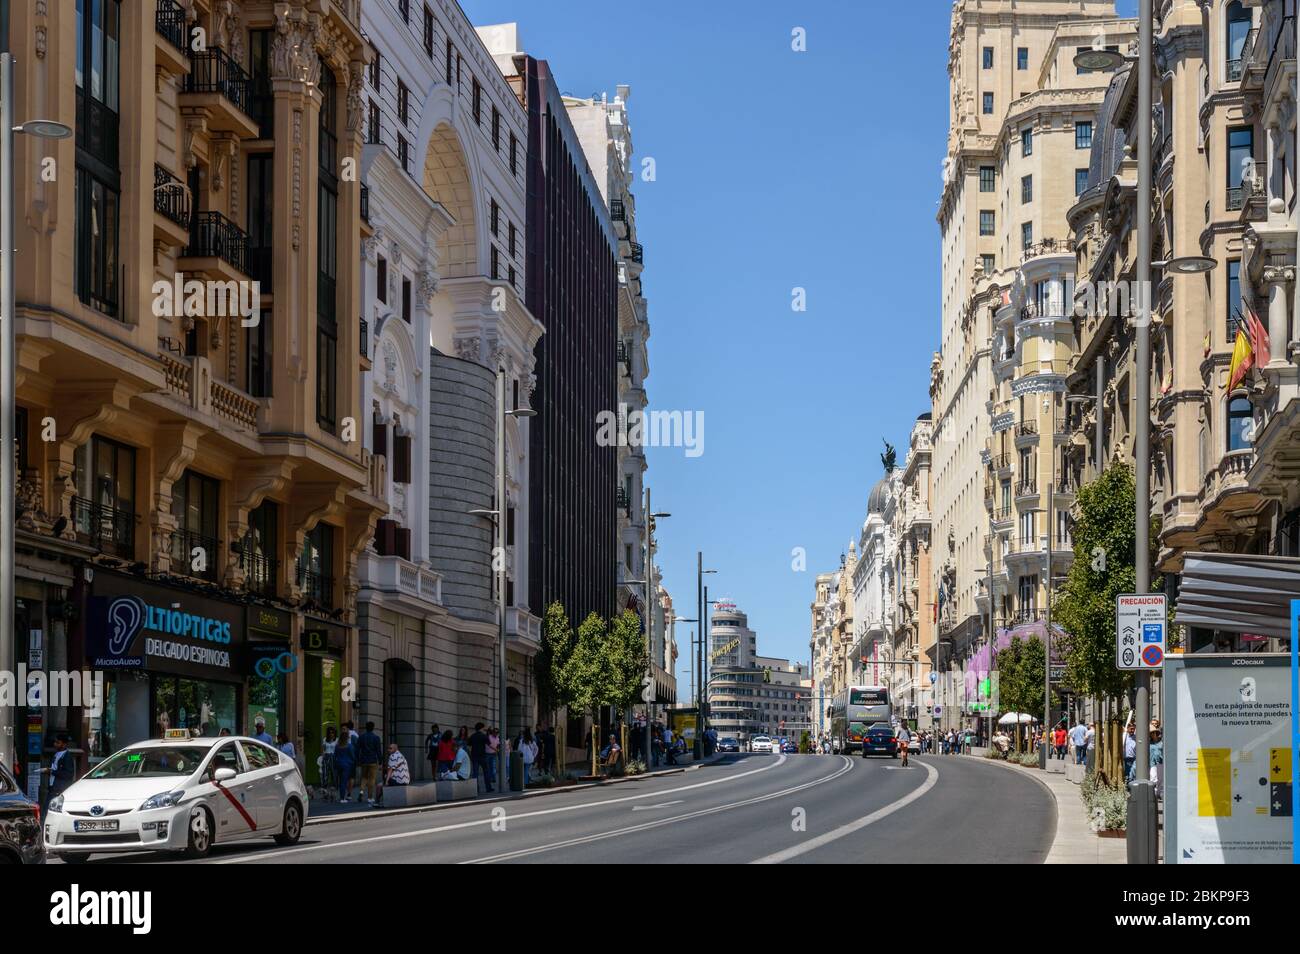 Gran Via Totally Decongested Of Cars And With Barely Passers by In Madrid. June 15, 2019. Madrid. Spain. Travel Tourism Holidays Stock Photo